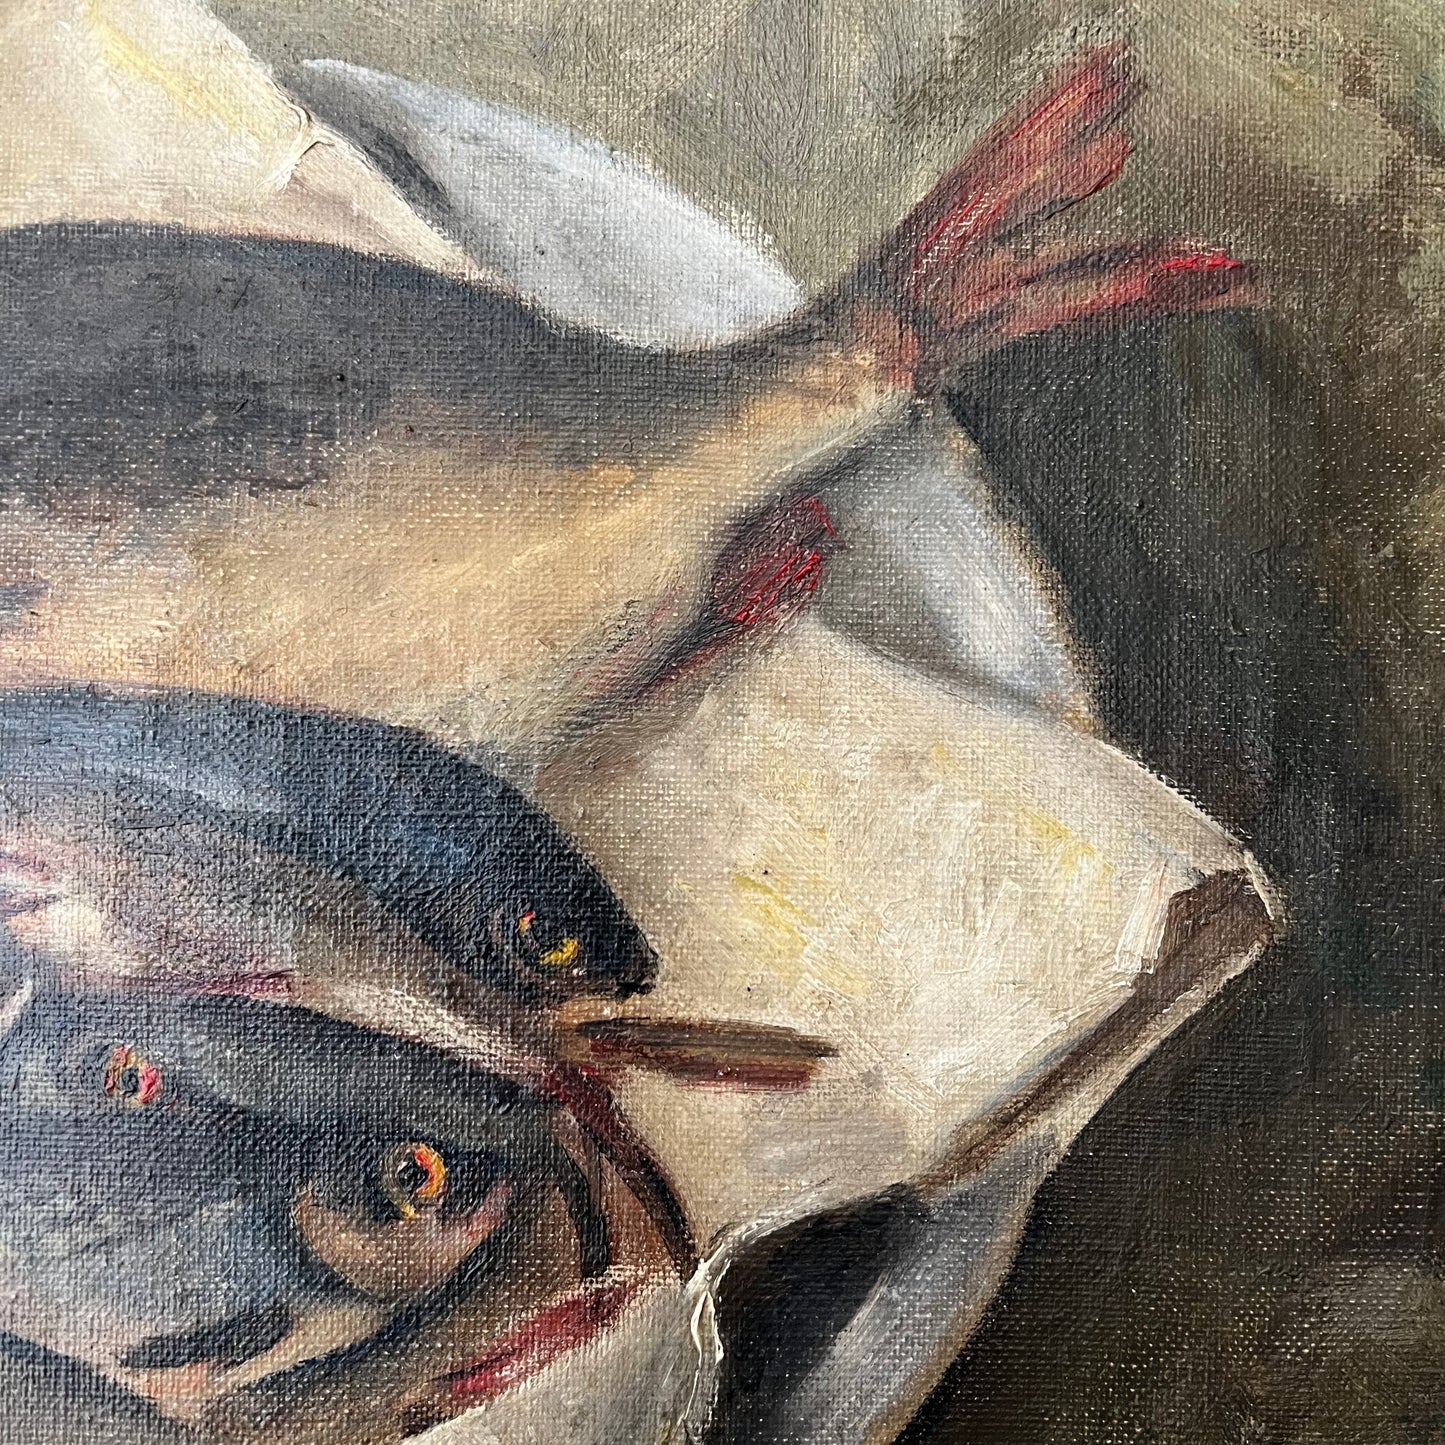 Divine Vintage Oil Painting Dutch Still Life Fish on Plate 1940s